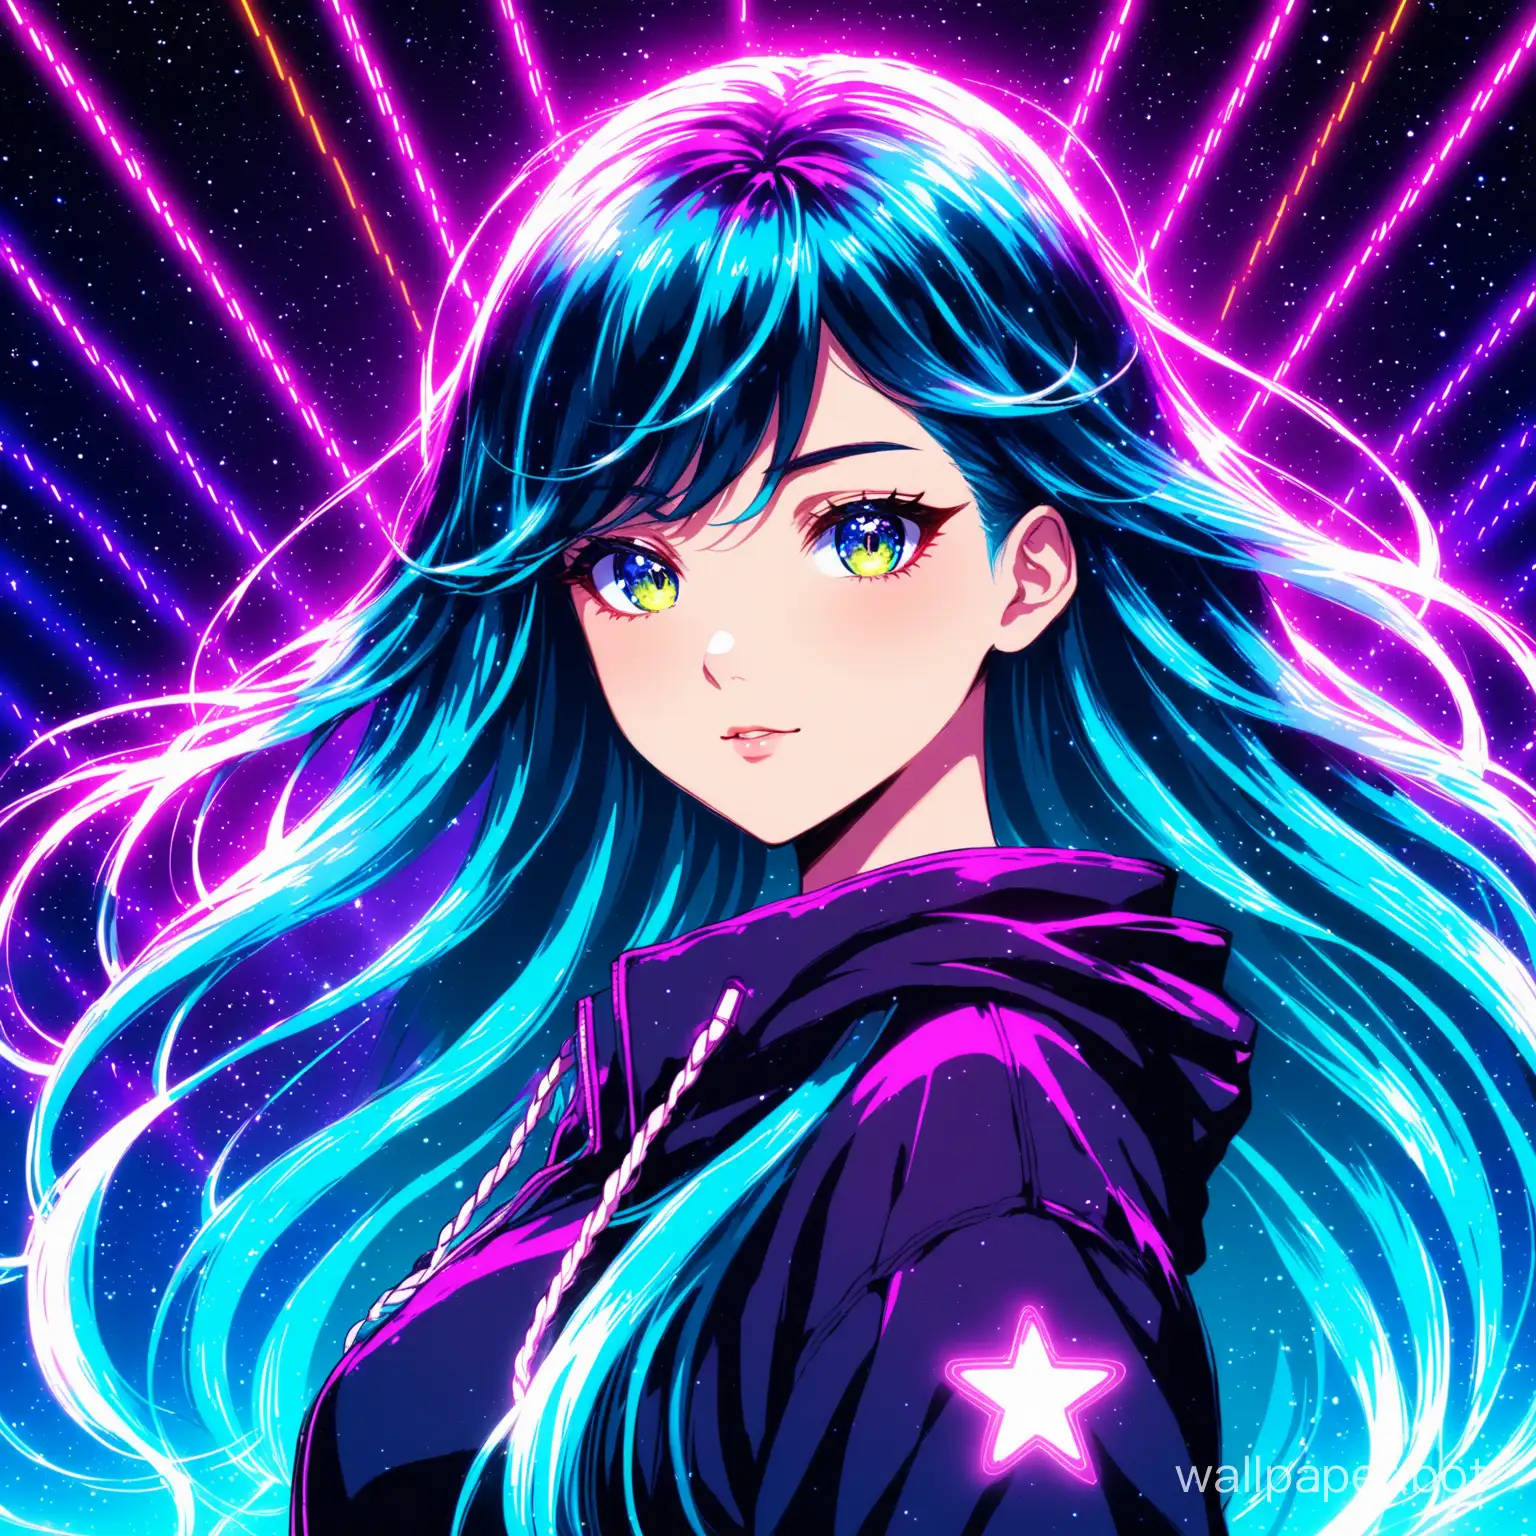 Cool girl with long hair, neon lights, glowing waves, anime style, universe hairstyle, digital art